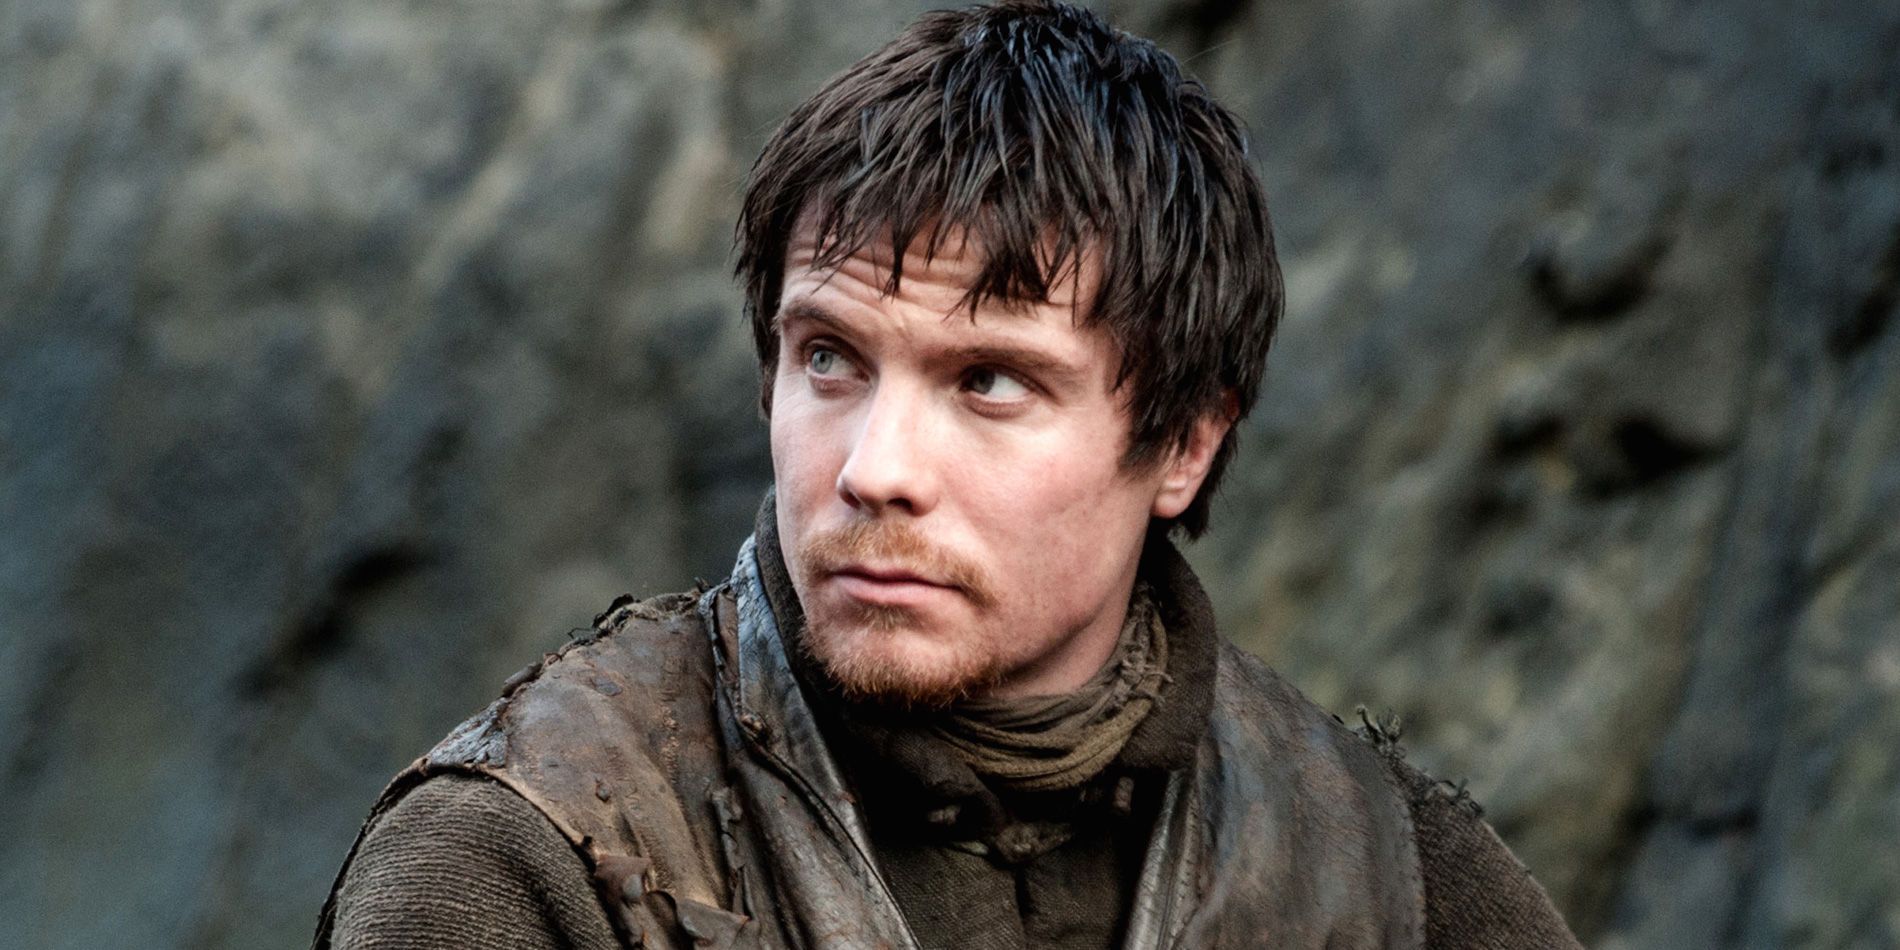 Gendry from Game of Thrones